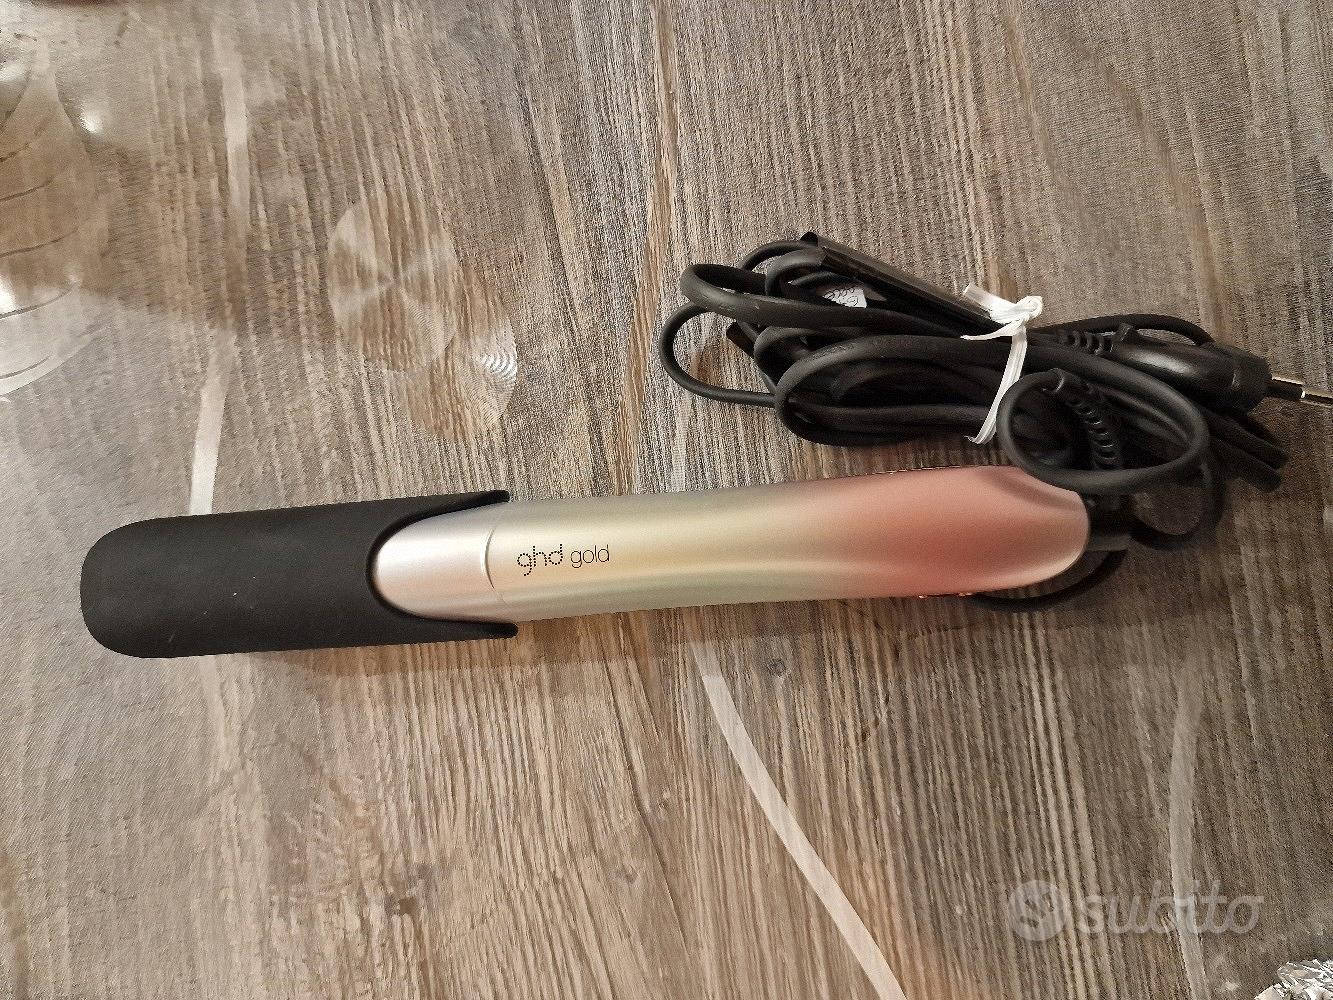 PIASTRA GHD GOLD